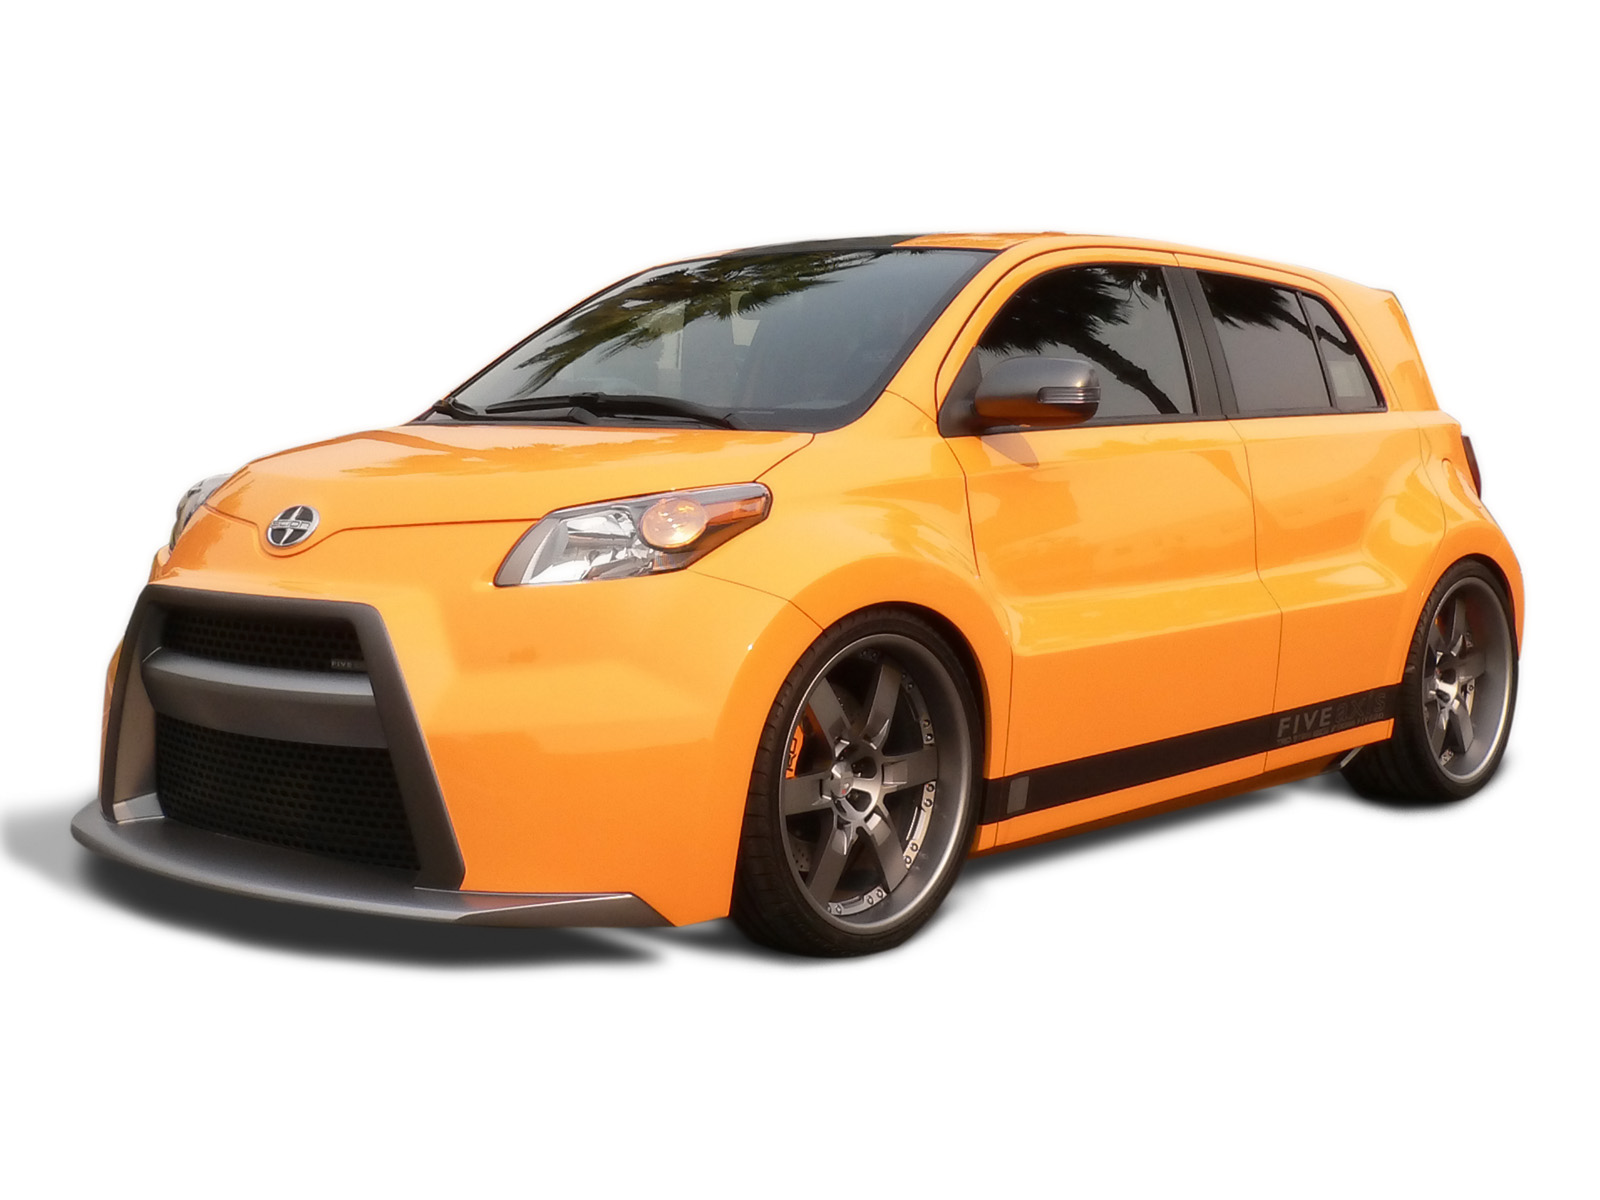 2007 Scion xD Widebody - Front And Side - 1600x1200 - Wallpaper